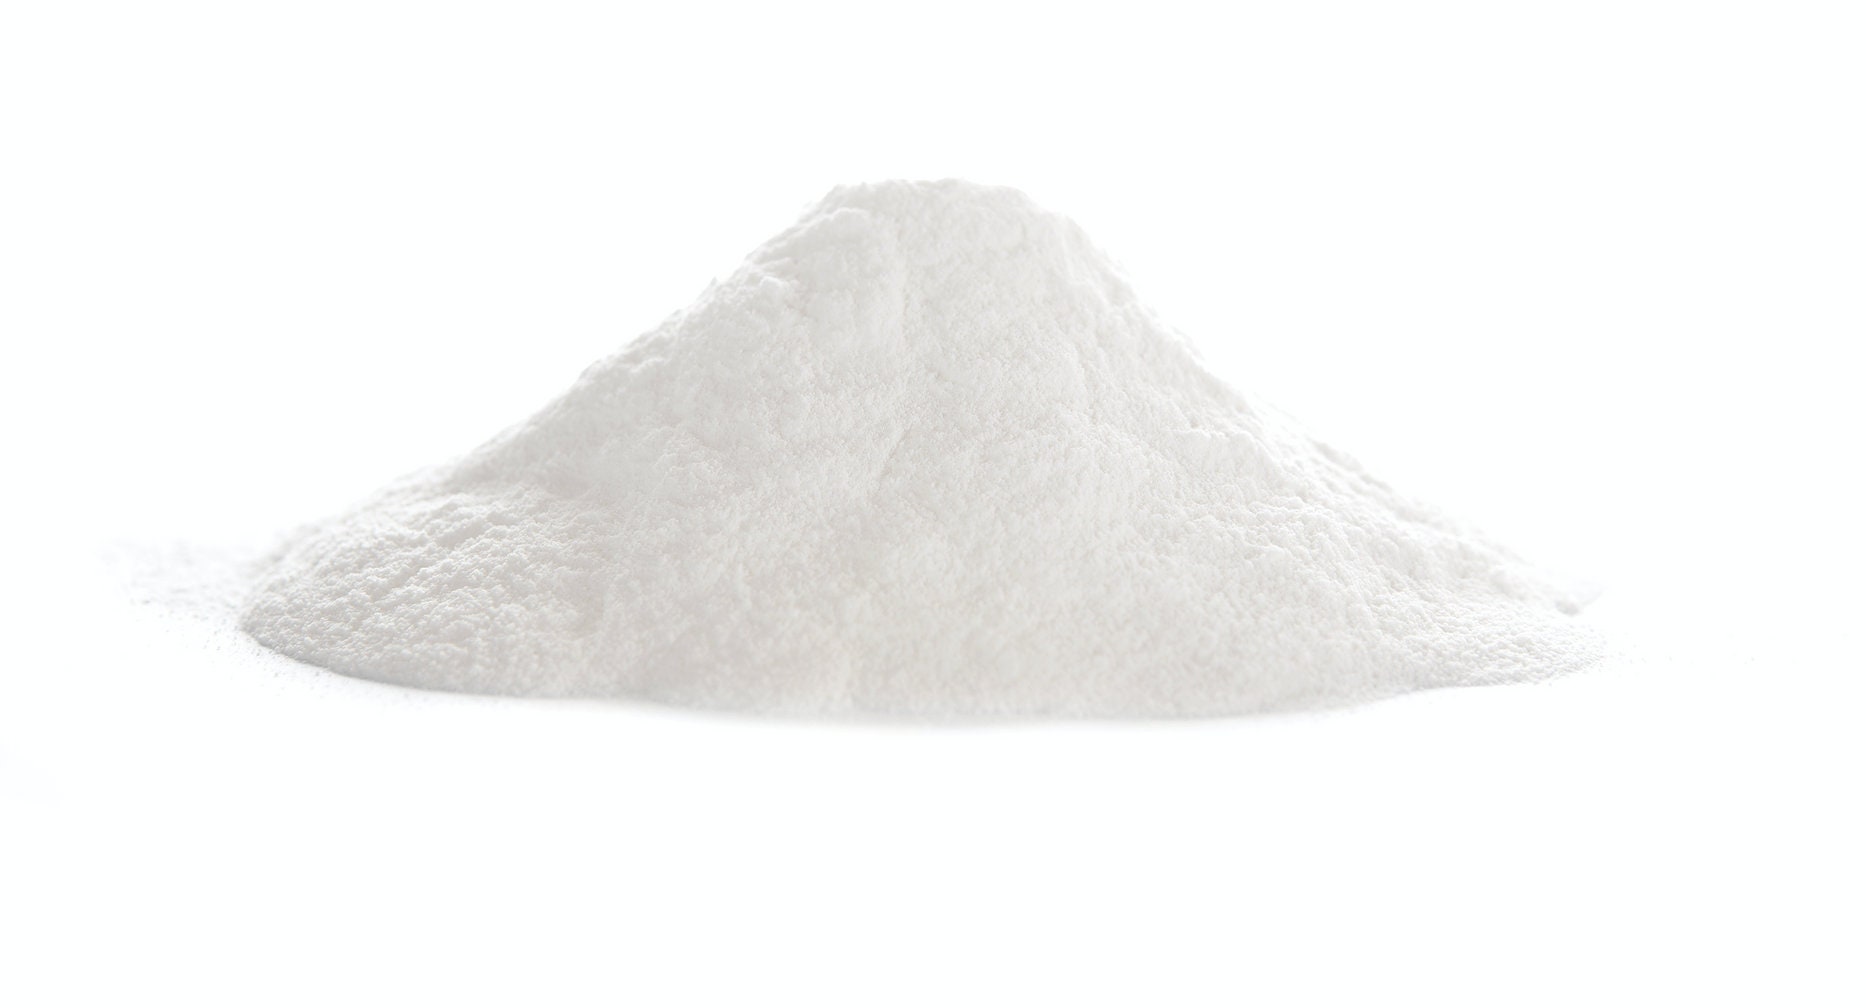 SLSA Sodium Lauryl Sulfoacetate powder ECO Cert RSPO Certified for Soap and Bath  Bomb Making Add Bubbles to Your Products. 